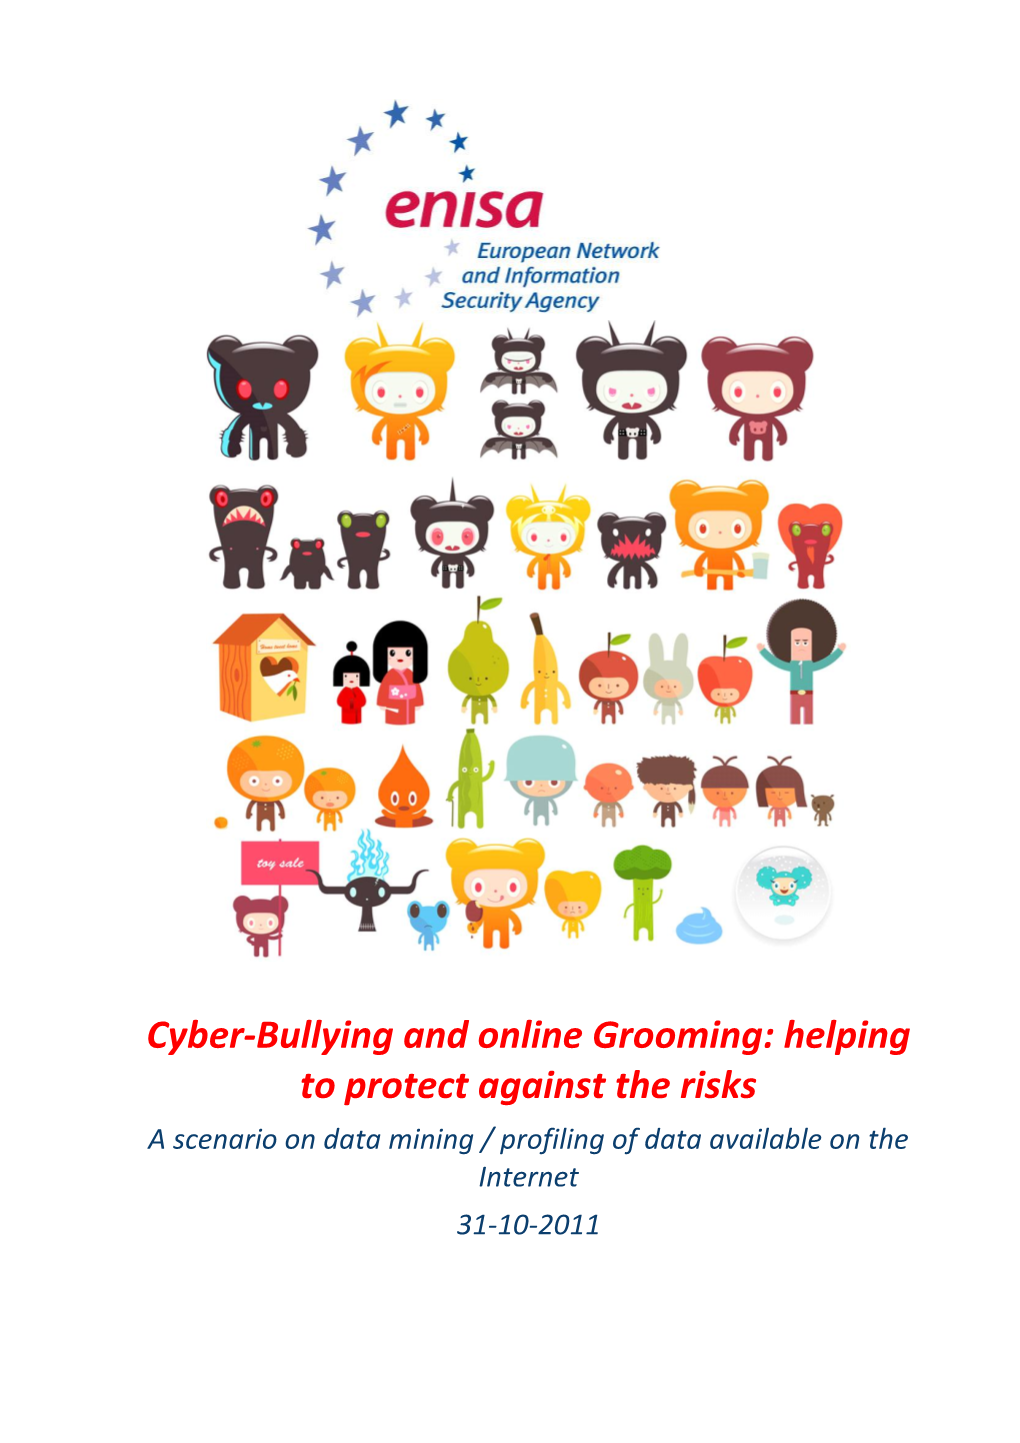 Cyber-Bullying and Online Grooming: Helping to Protect Against the Risks a Scenario on Data Mining / Profiling of Data Available on the Internet 31-10-2011